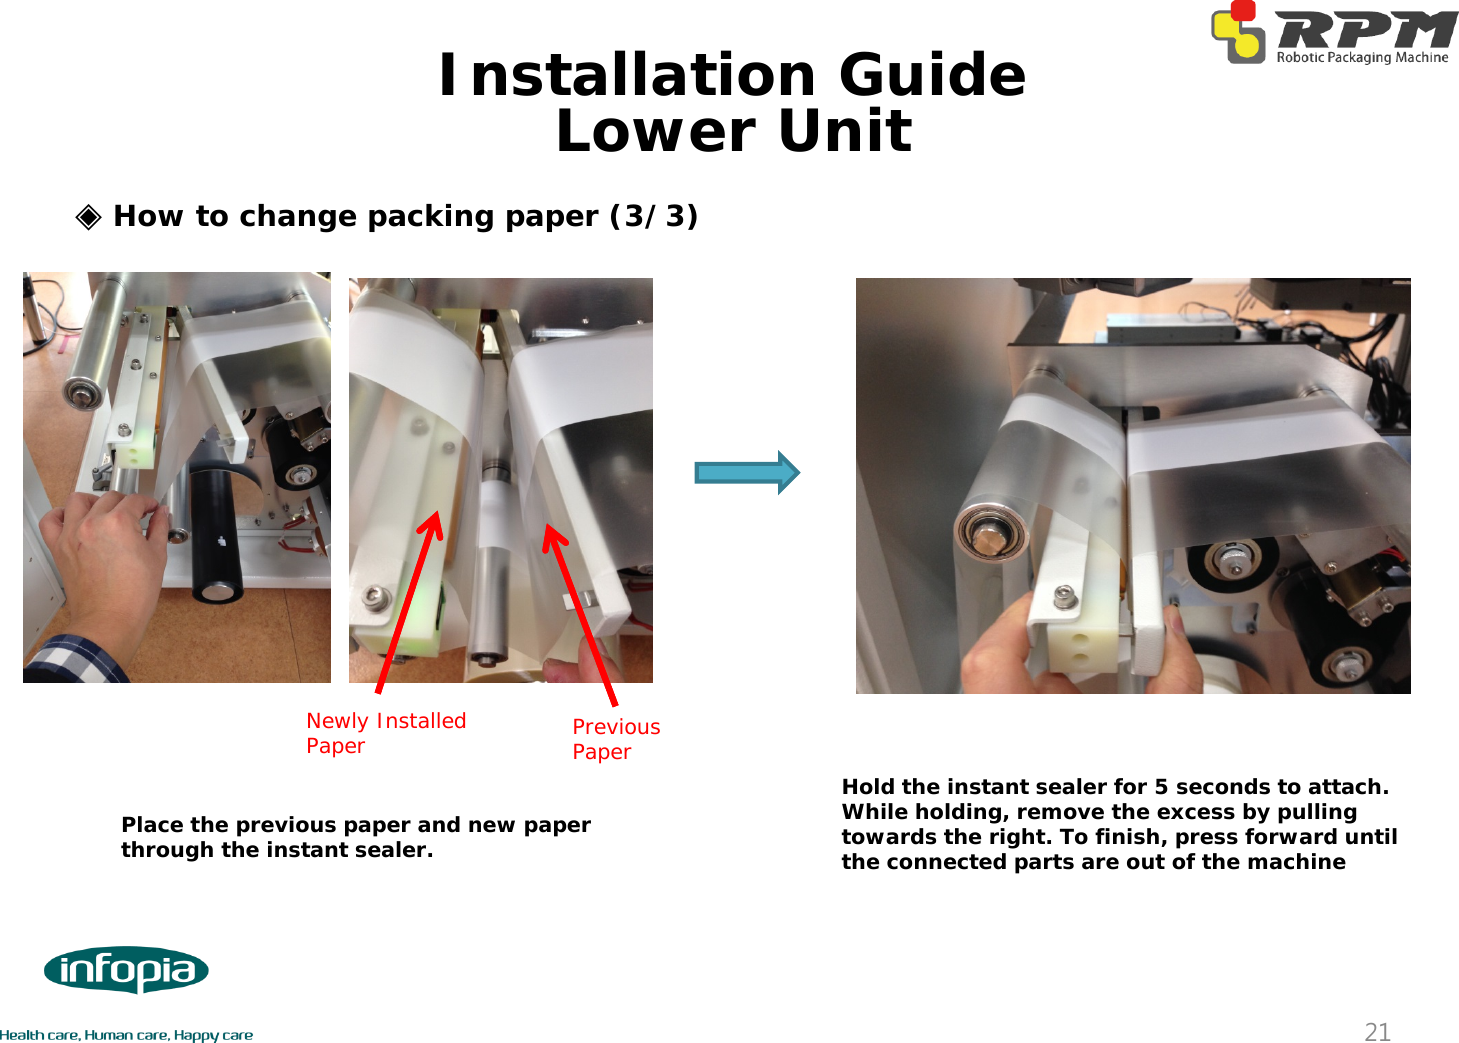 ◈How to change packing paper (3/3)Hold the instant sealer for 5 seconds to attach. While holding, remove the excess by pulling towards the right. To finish, press forward until the connected parts are out of the machine Lower UnitPlace the previous paper and new paper through the instant sealer. Newly Installed Paper  Previous Paper21Installation Guide